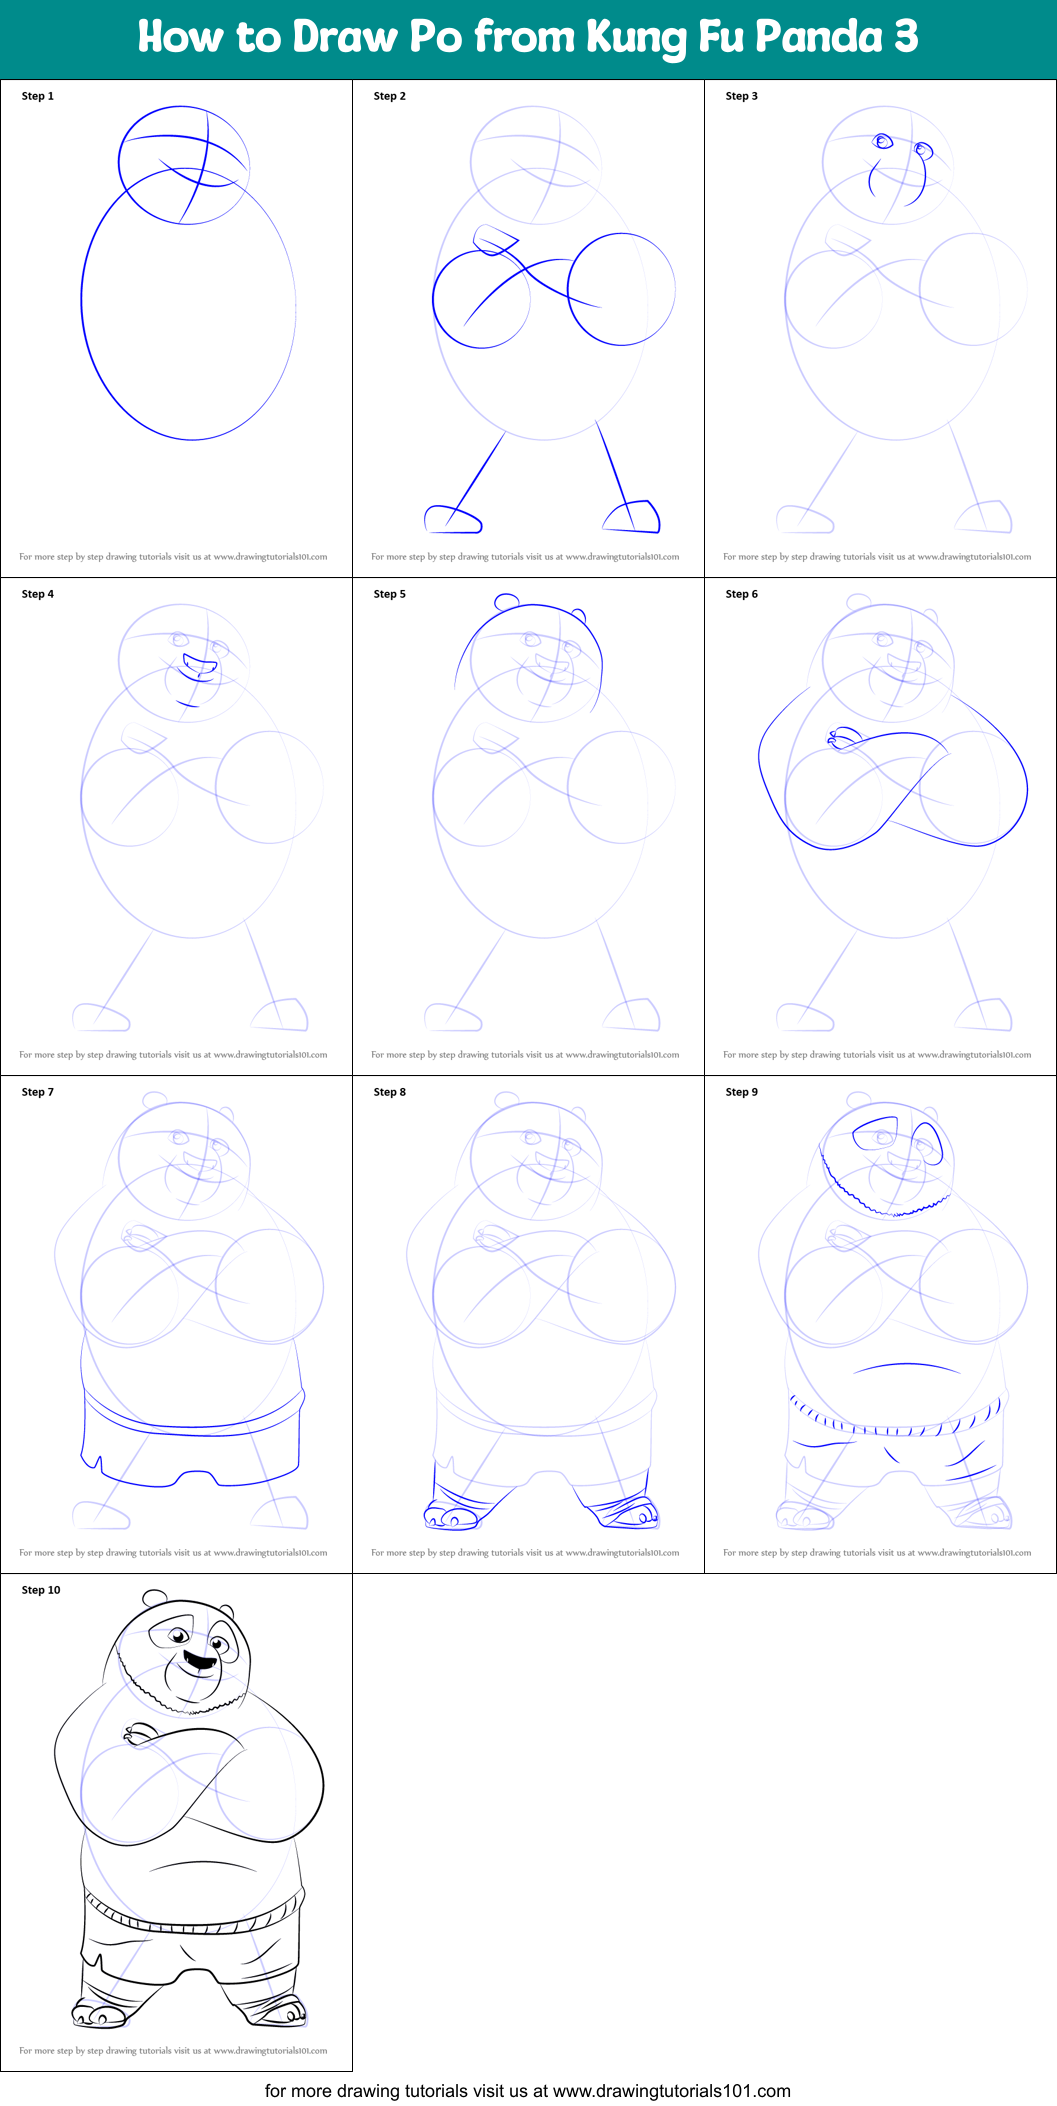 How to Draw Po from Kung Fu Panda 3 printable step by step drawing